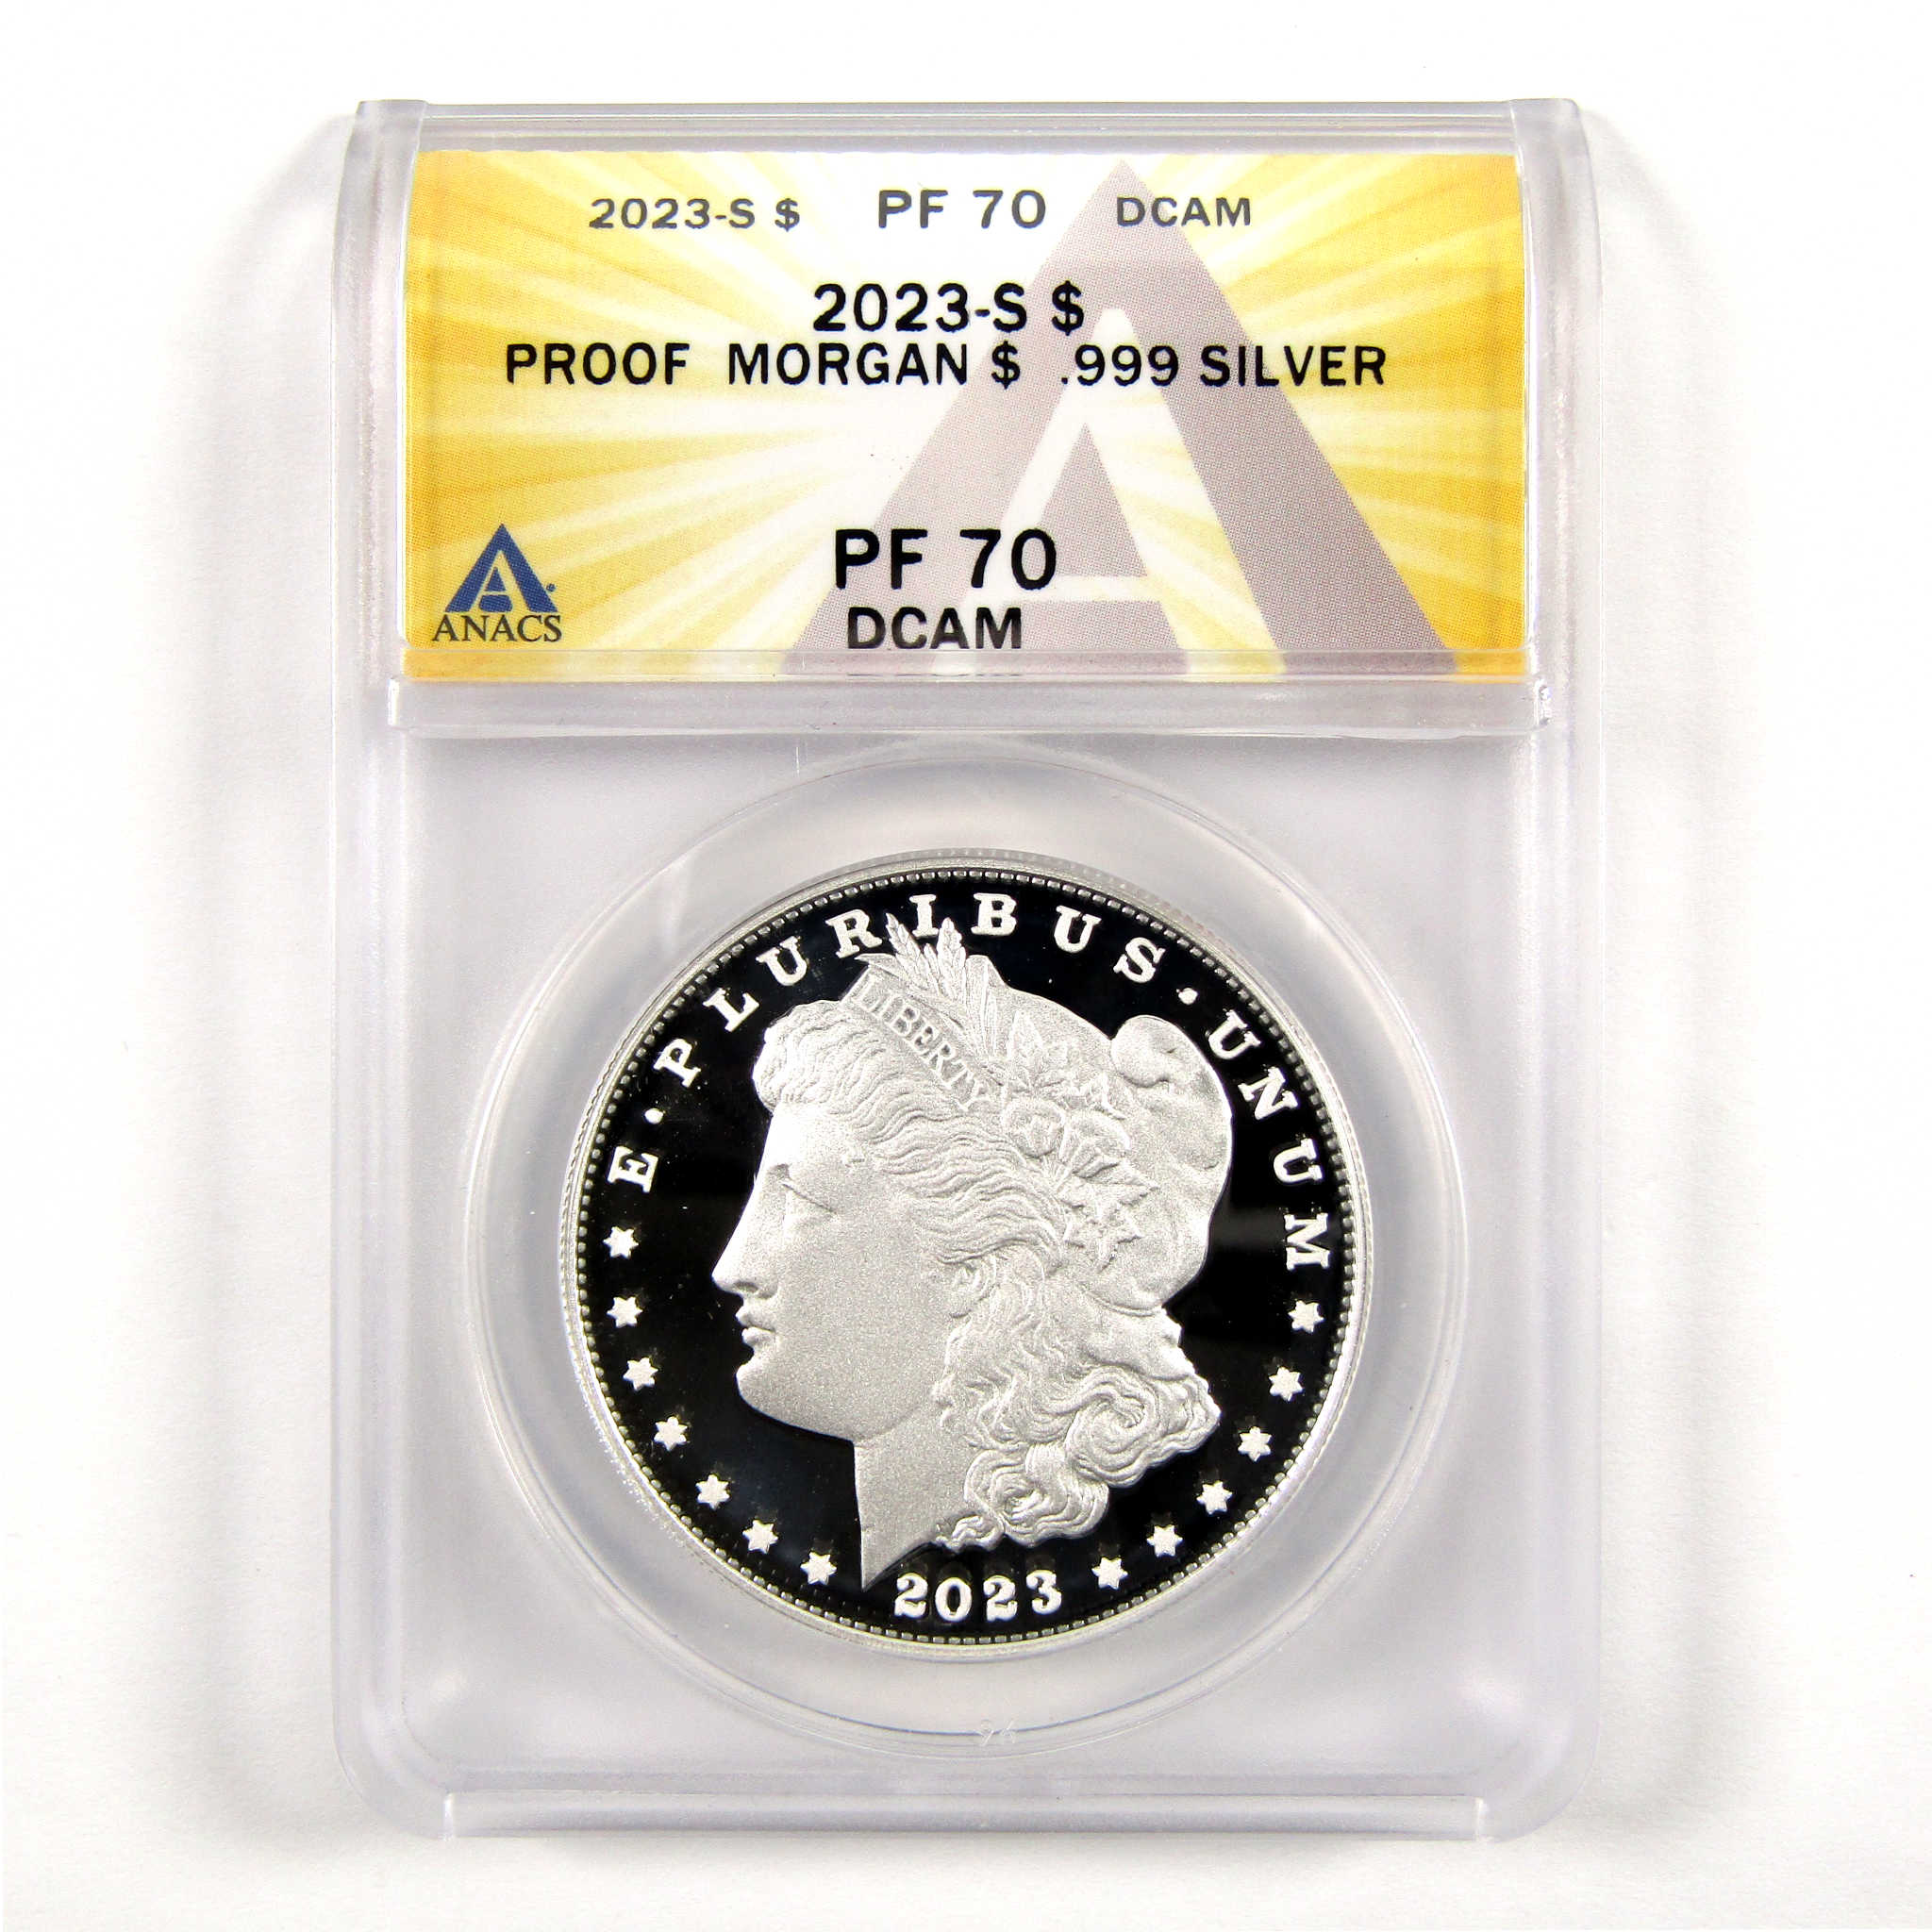 2023 S Morgan Modern Anniversary PF 70 DCAM ANACS SKU:CPC6017 - Morgan coin - Morgan silver dollar - Morgan silver dollar for sale - Profile Coins &amp; Collectibles